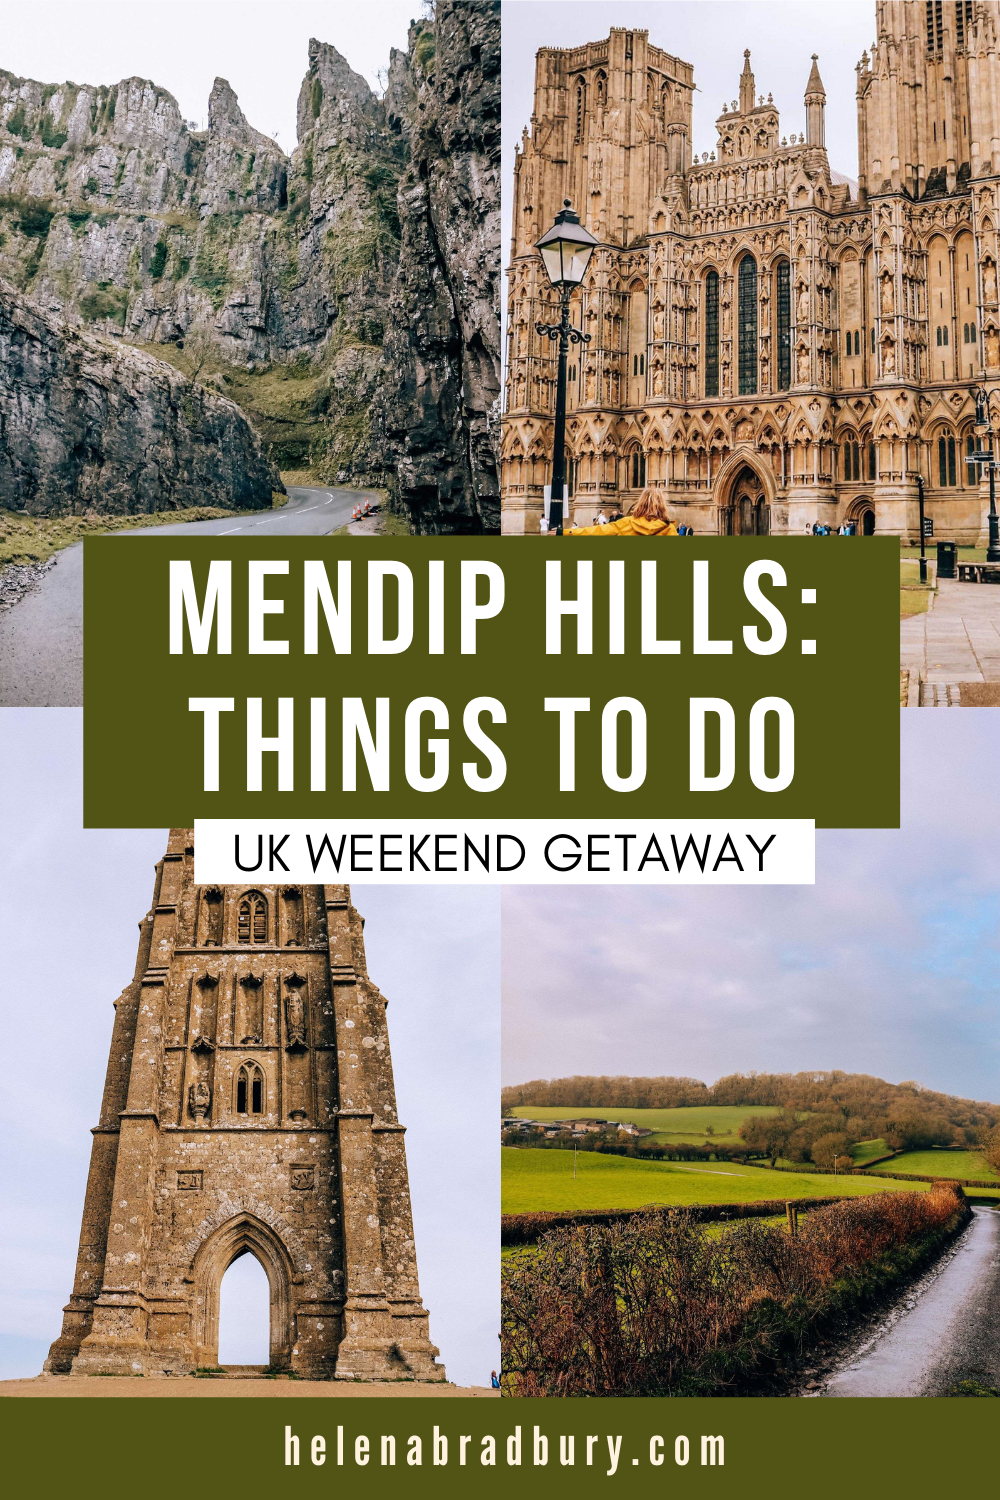 The Mendip Hills in Somerset are an underrated destination in the UK but are perfect for a UK weekend getaway. Use this guide to plan things to do in the Mendips | Helena Bradbury travel blog | uk travel destinations beautiful places | somerset engl…